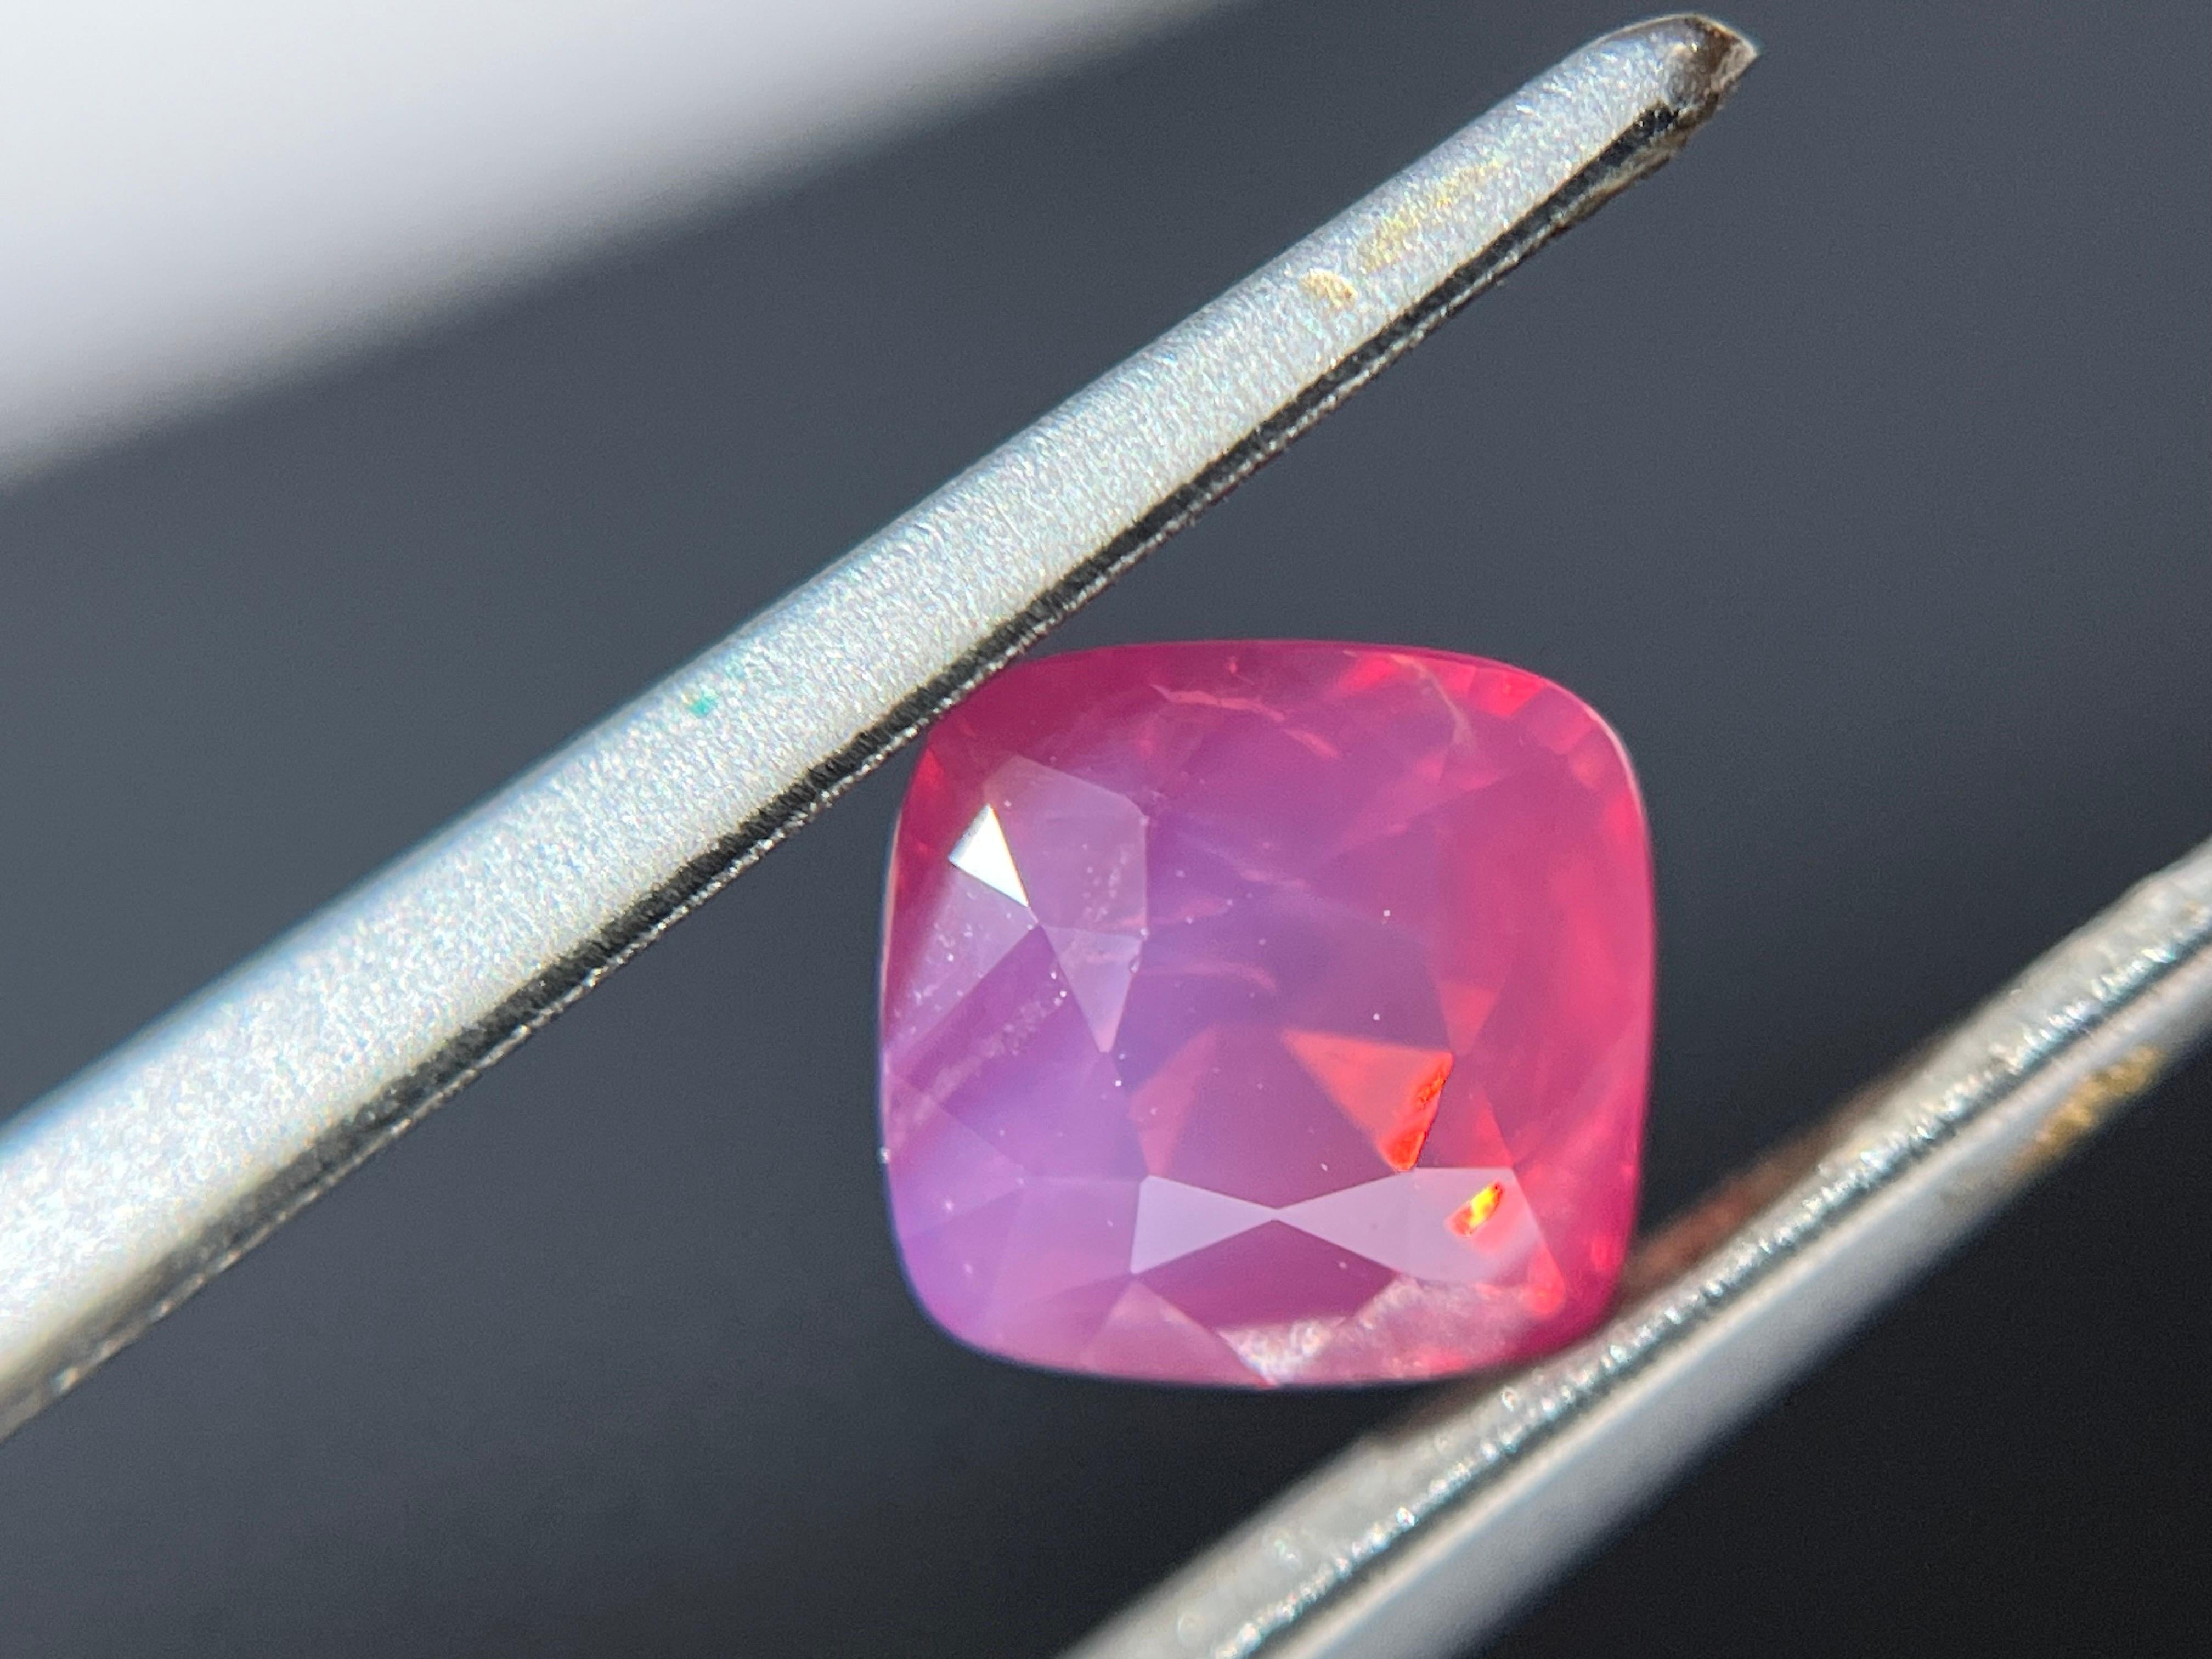 Introducing our exceptional Mahenge spinel with a silky body neon pink color and orange fire that is truly one-of-a-kind. This gemstone is a marvel of nature, with its rare and captivating hue that exudes warmth and vitality.

Sourced from the